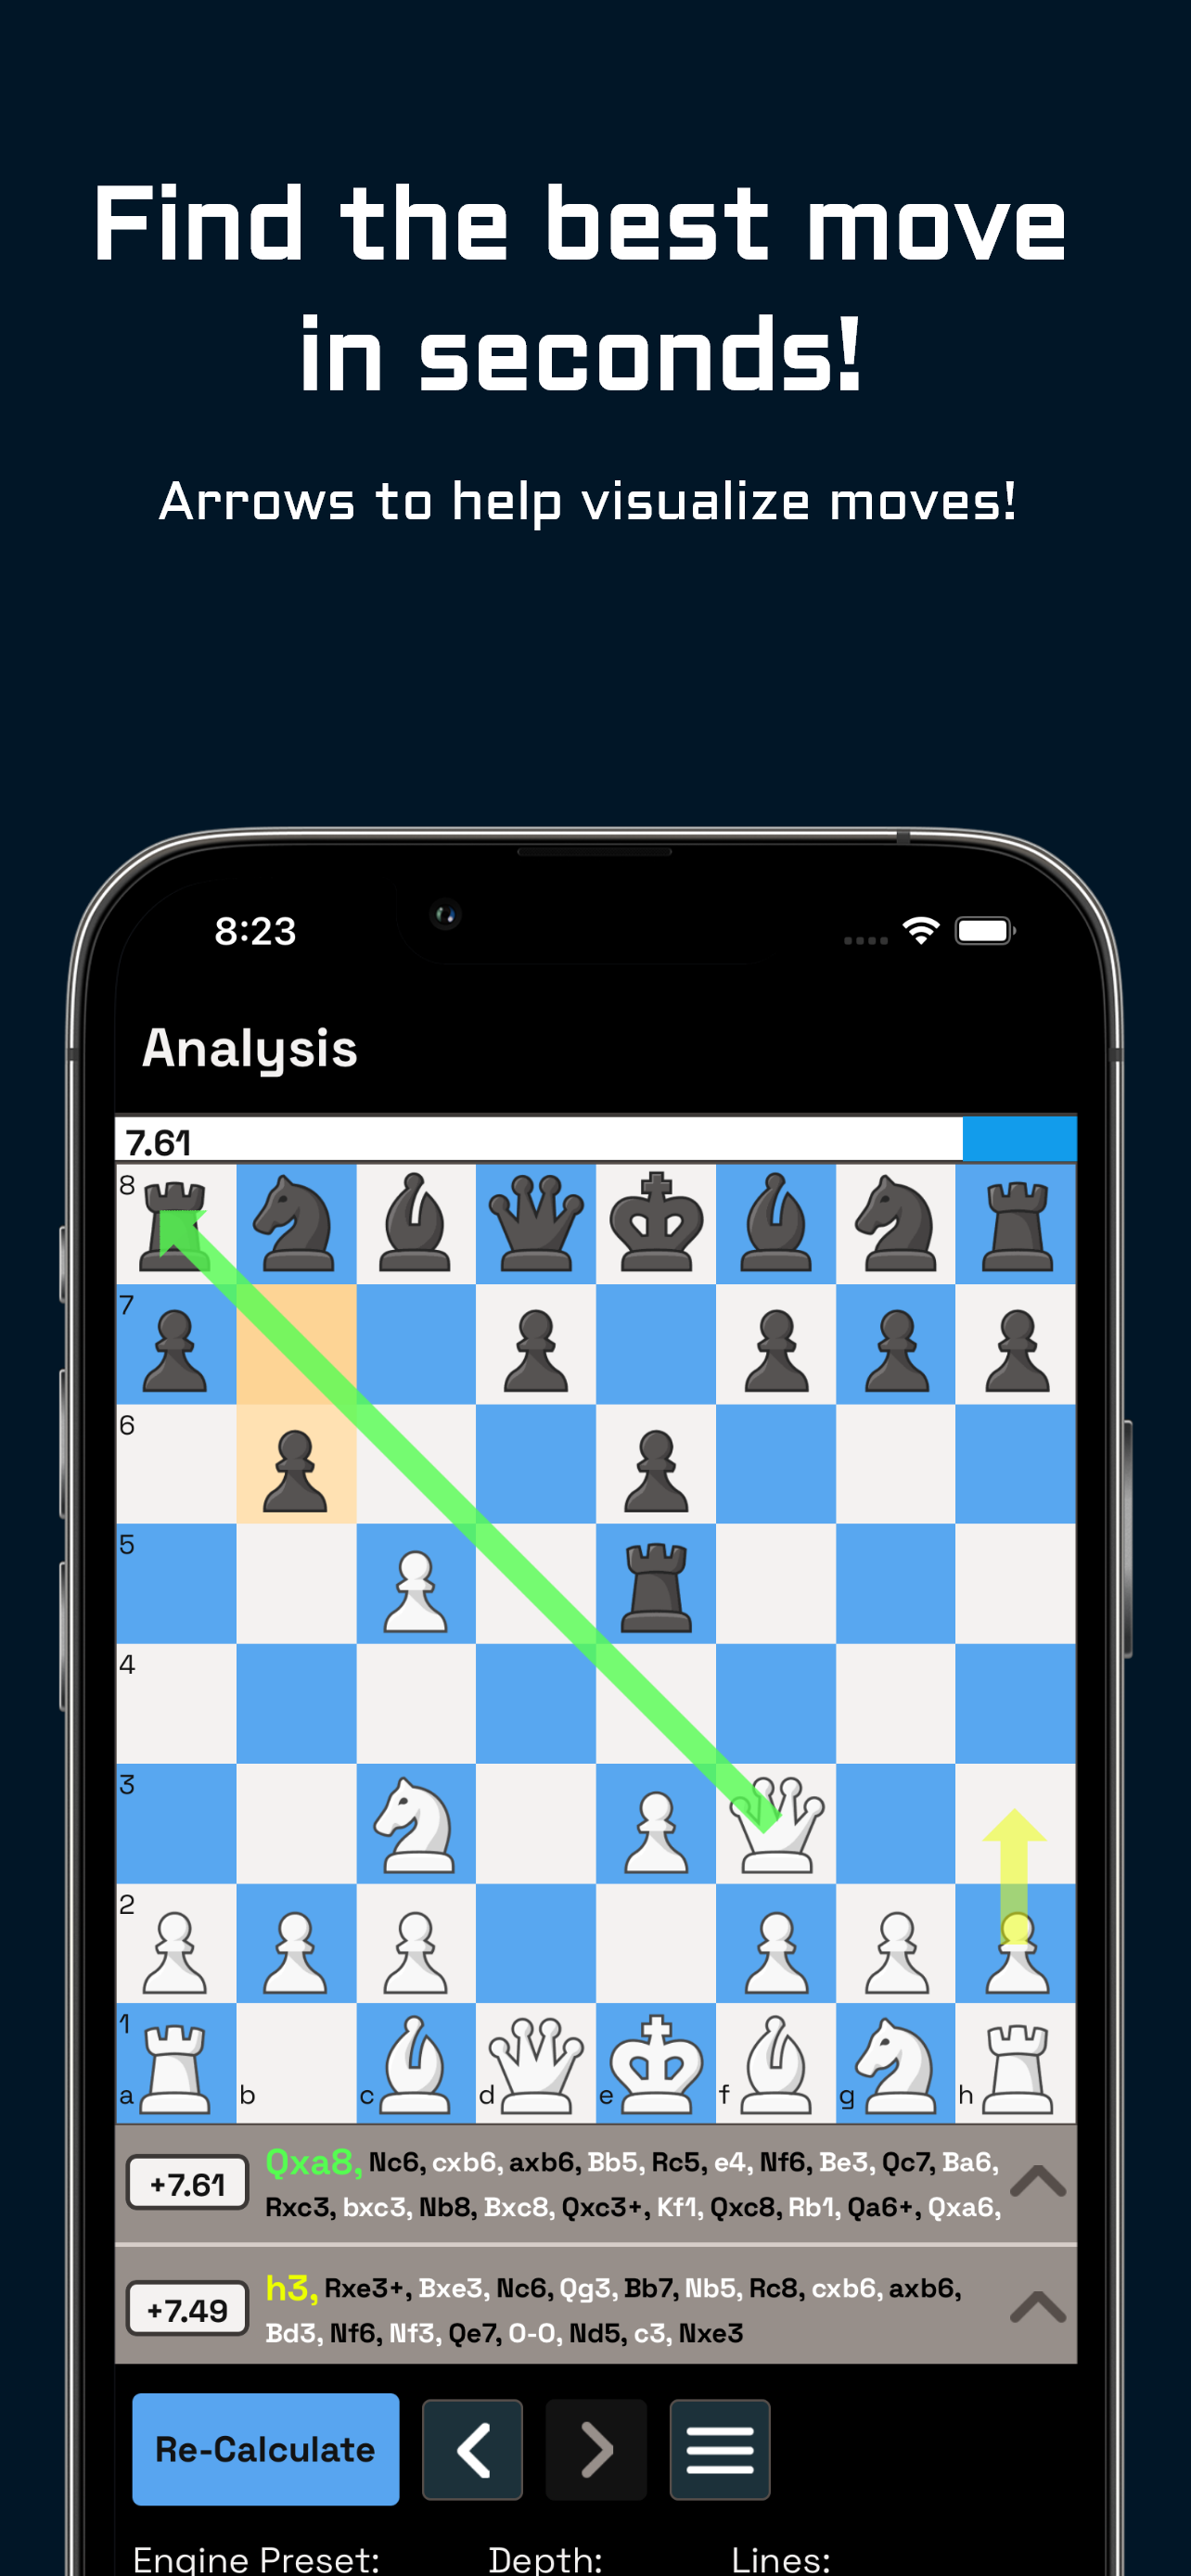 Chess Move - Stockfish Engine APK (Android Game) - Free Download